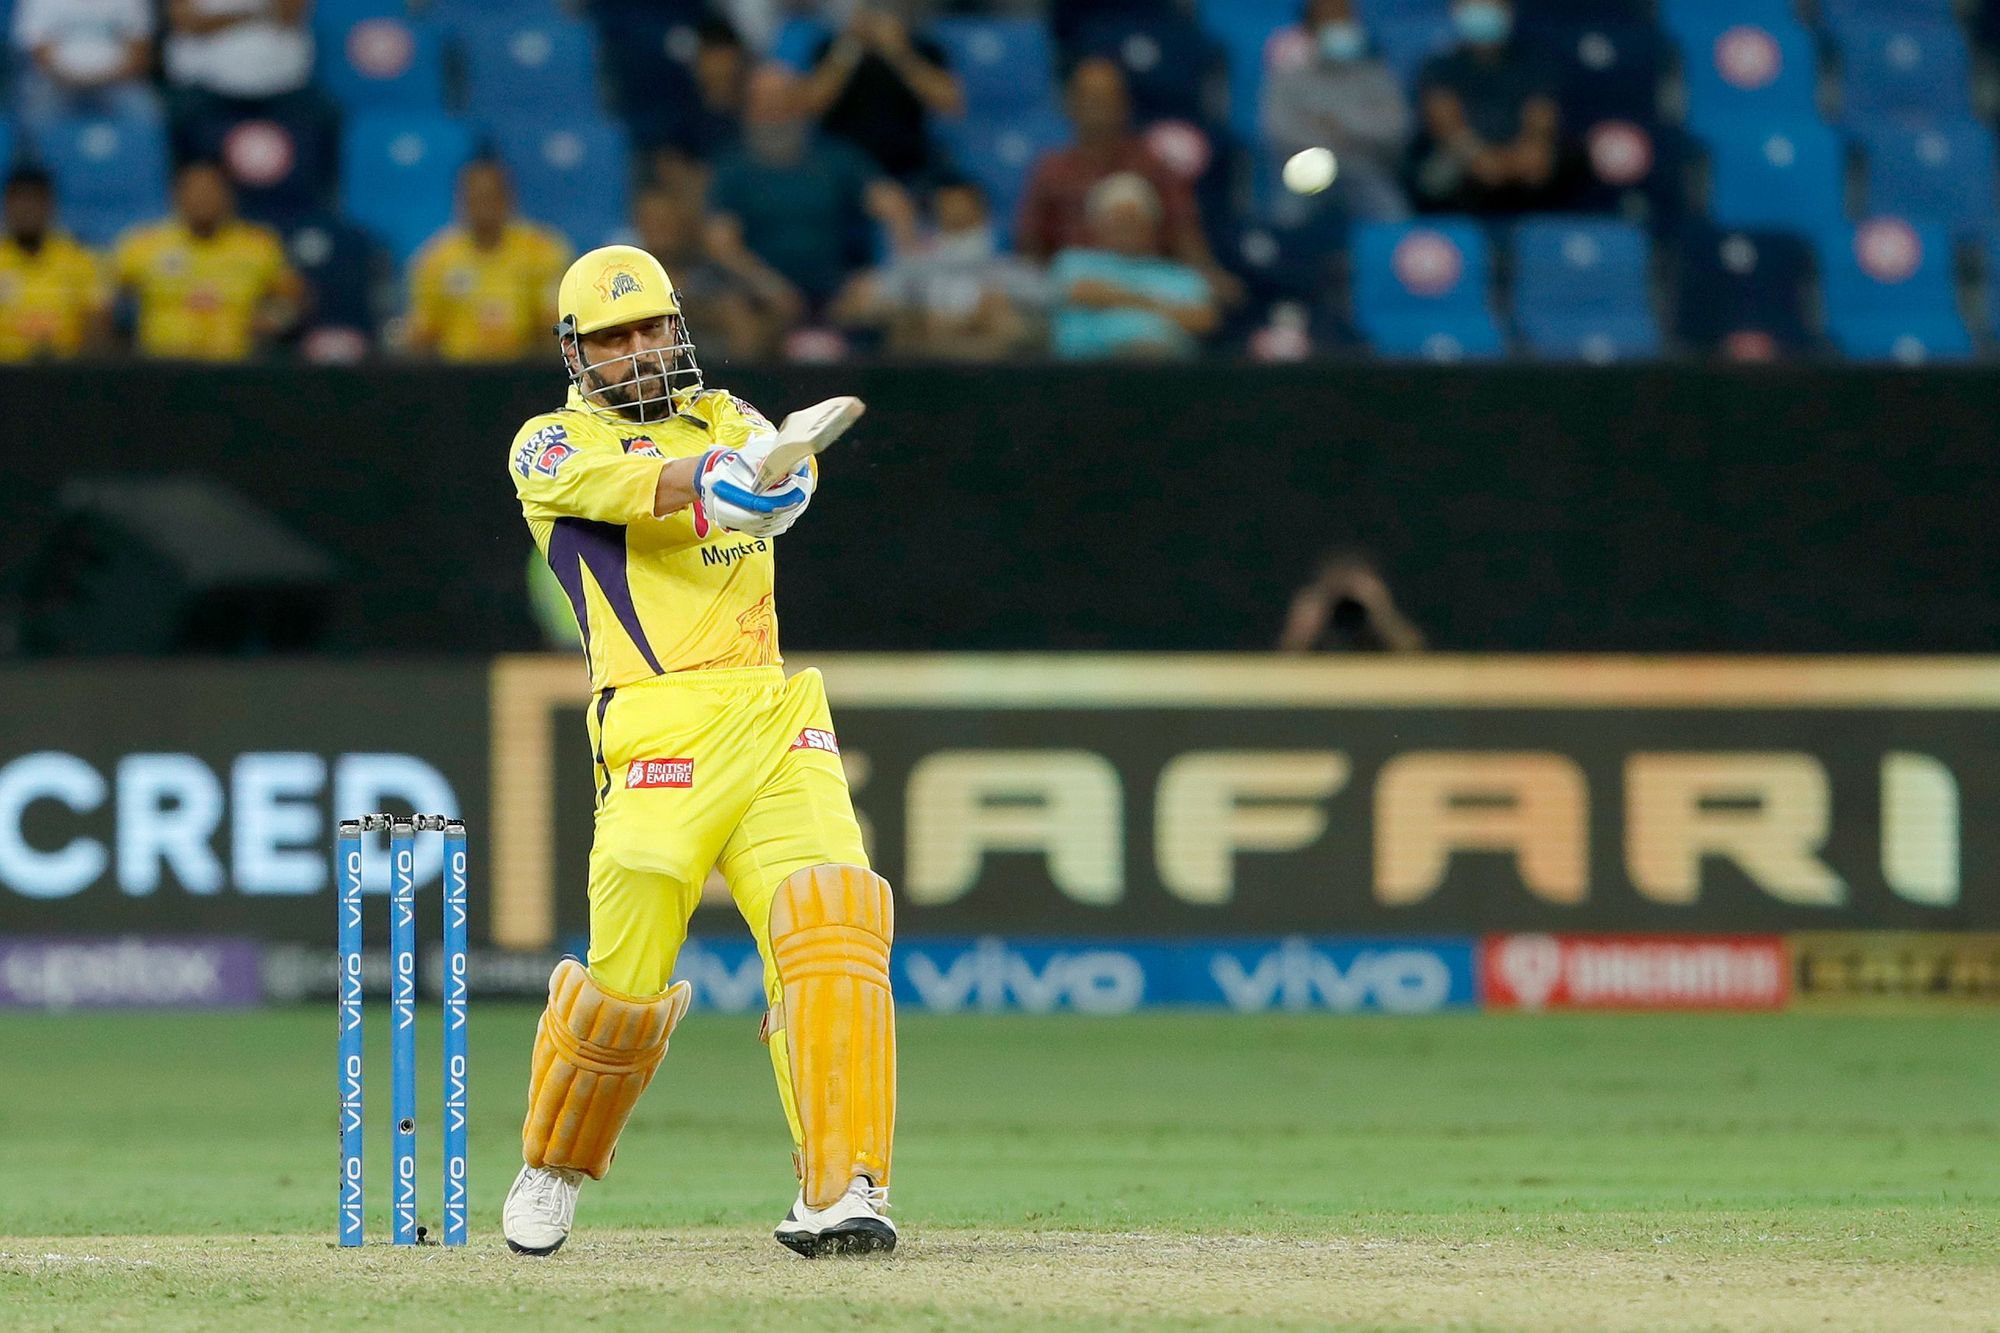 MS Dhoni's cameo sealed the deal for CSK | BCCI/IPL